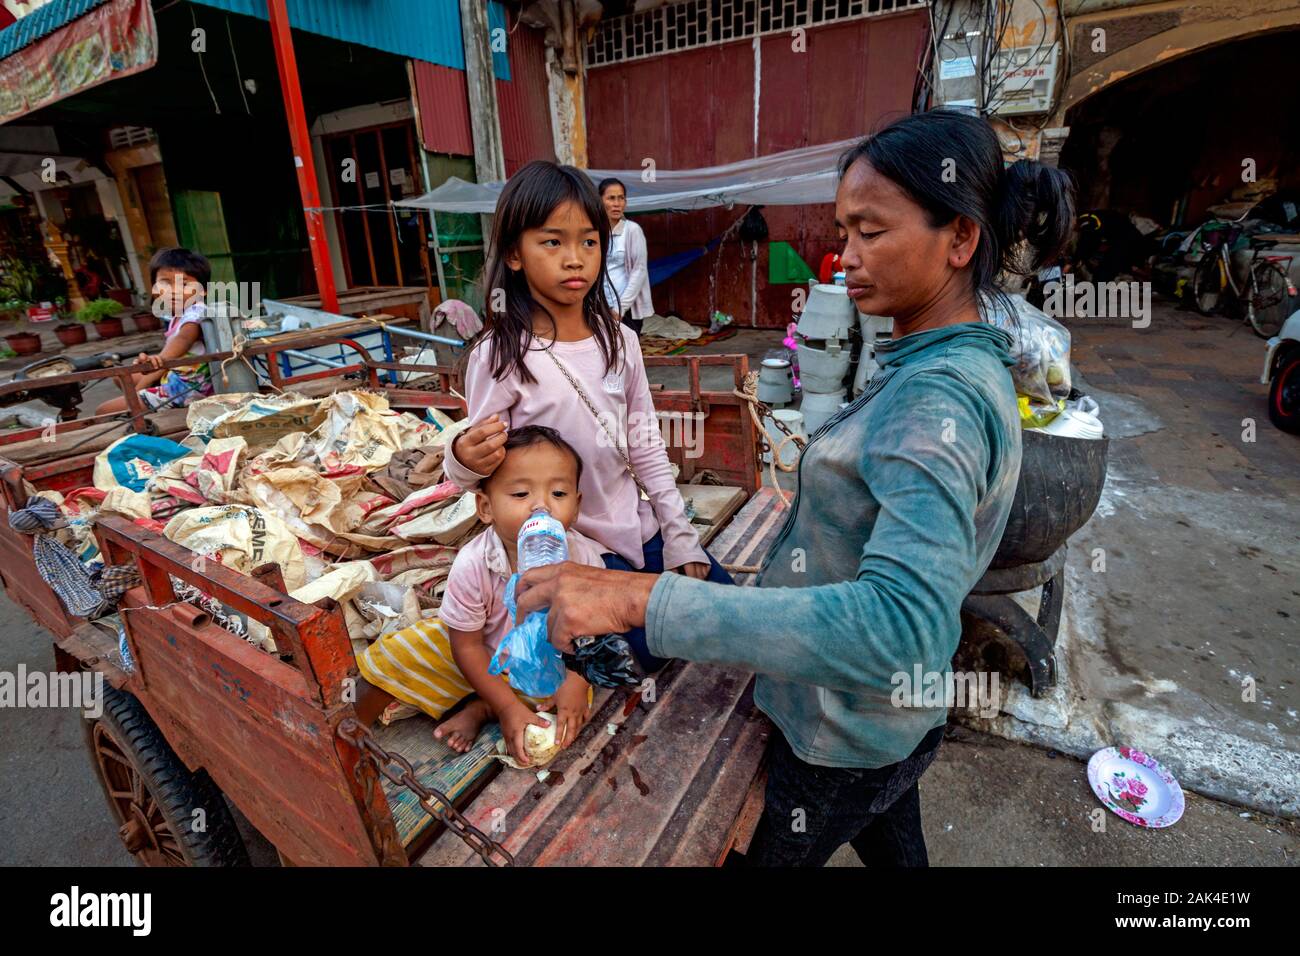 A poor thirsty toddler whose homeless family scavenges for recyclable material drinks water in a cart that transports waste in Kampong Cham, Cambodia Stock Photo